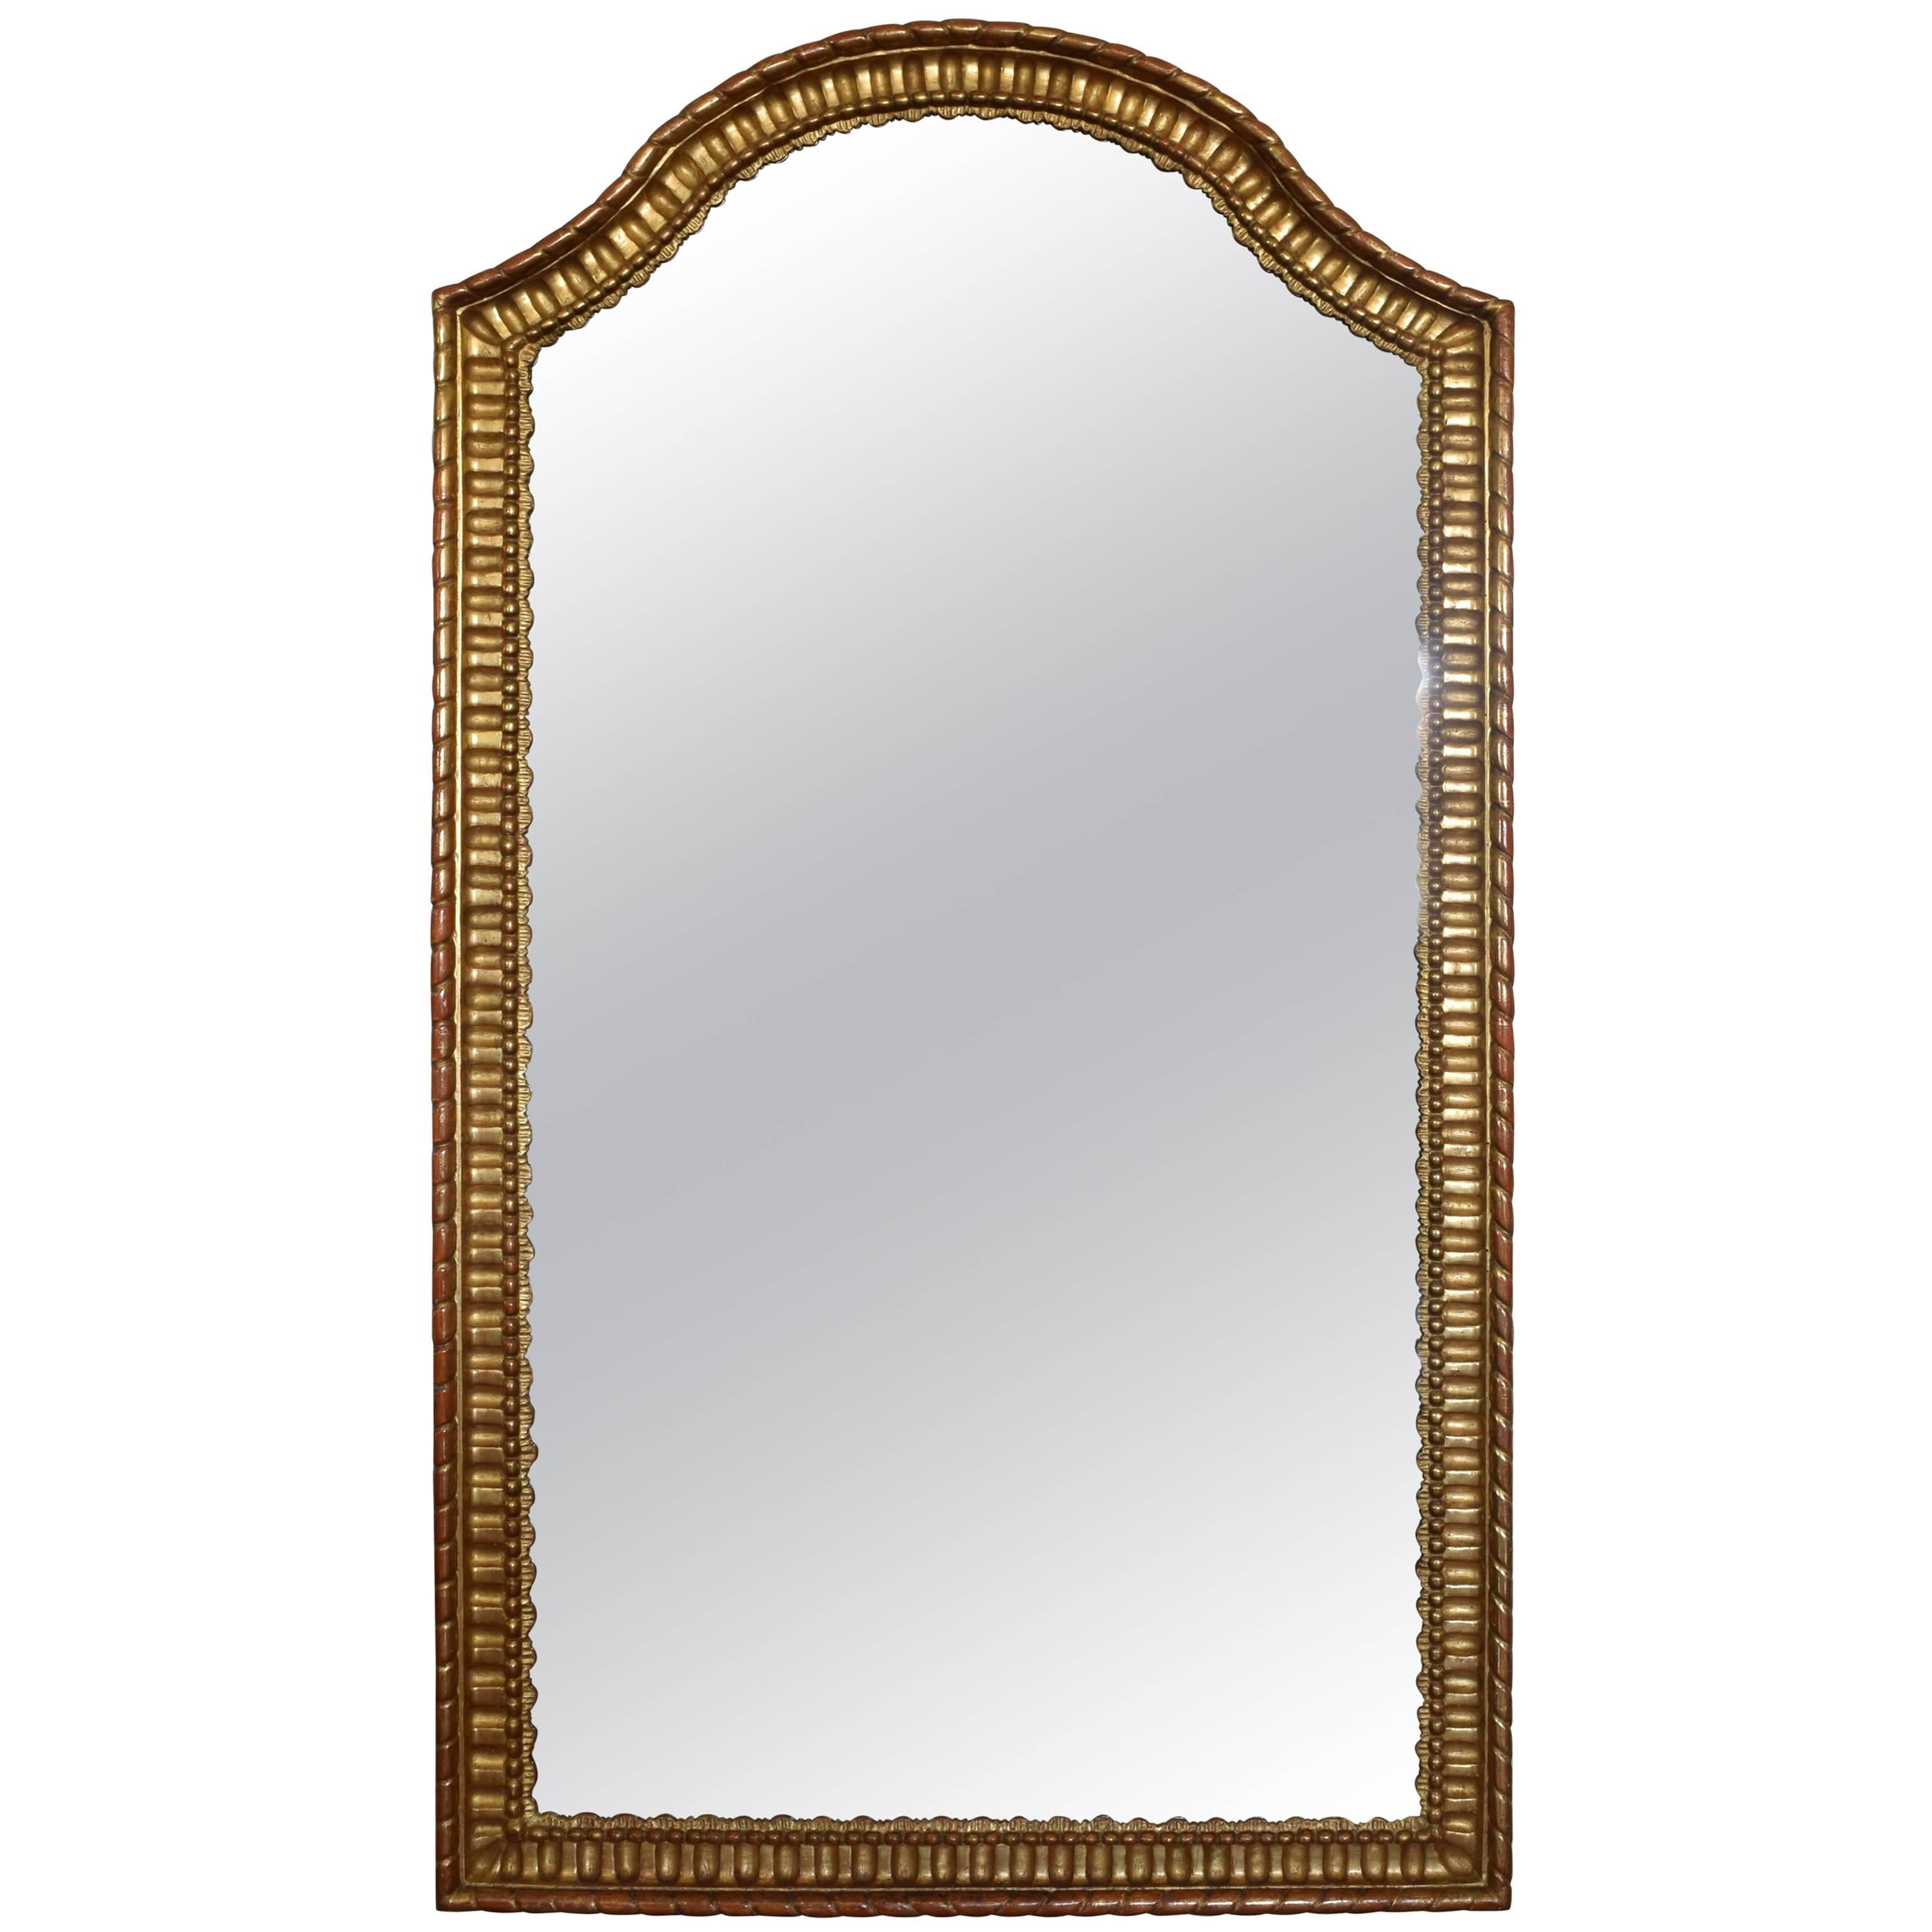 Italian Rococo Style Tall Carved Giltwood Mirror, Mid-19th Century